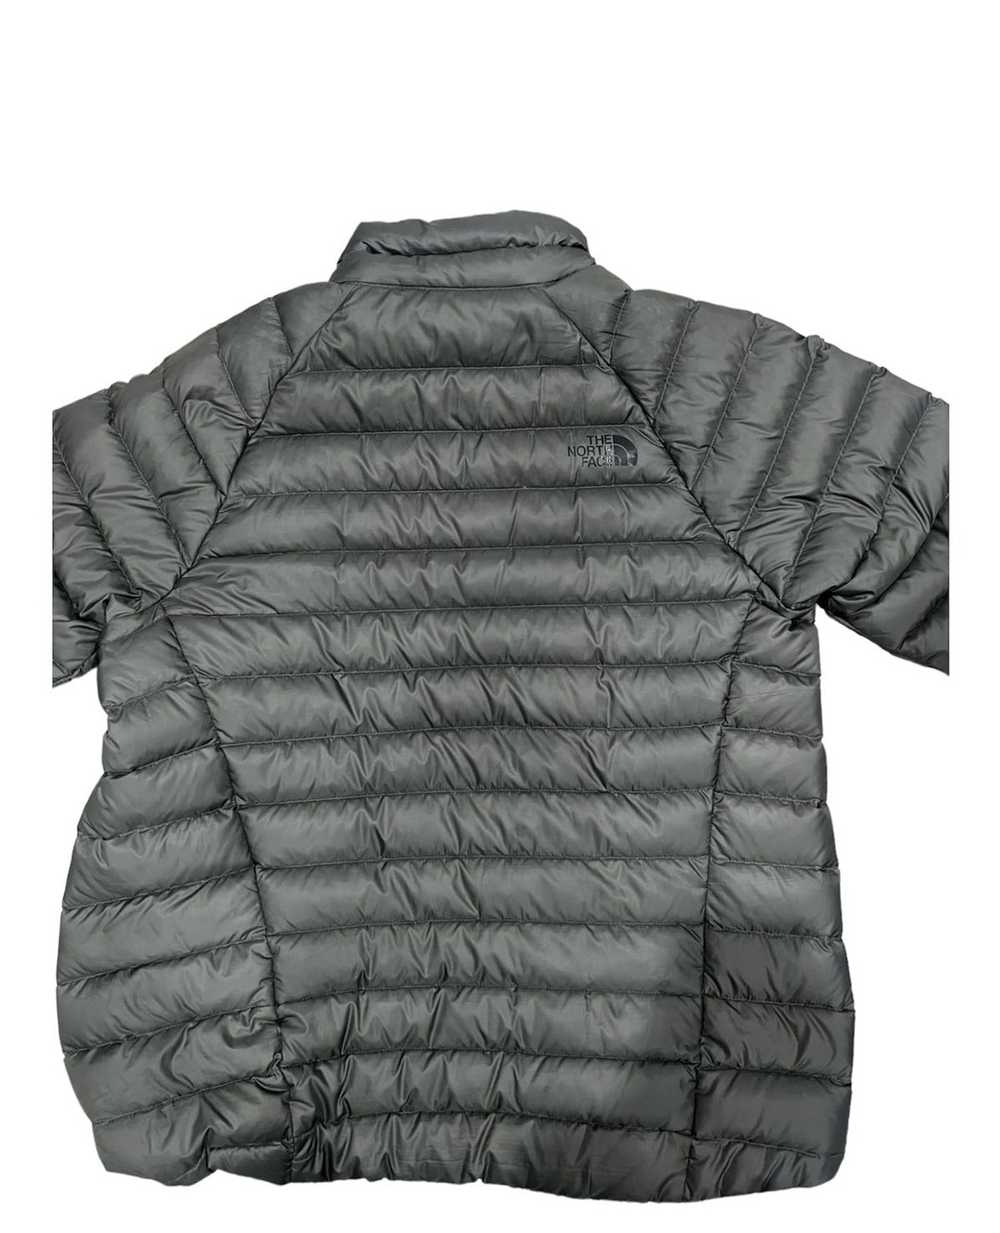 The North Face The North Face x Gray Bubble Jacket - image 5